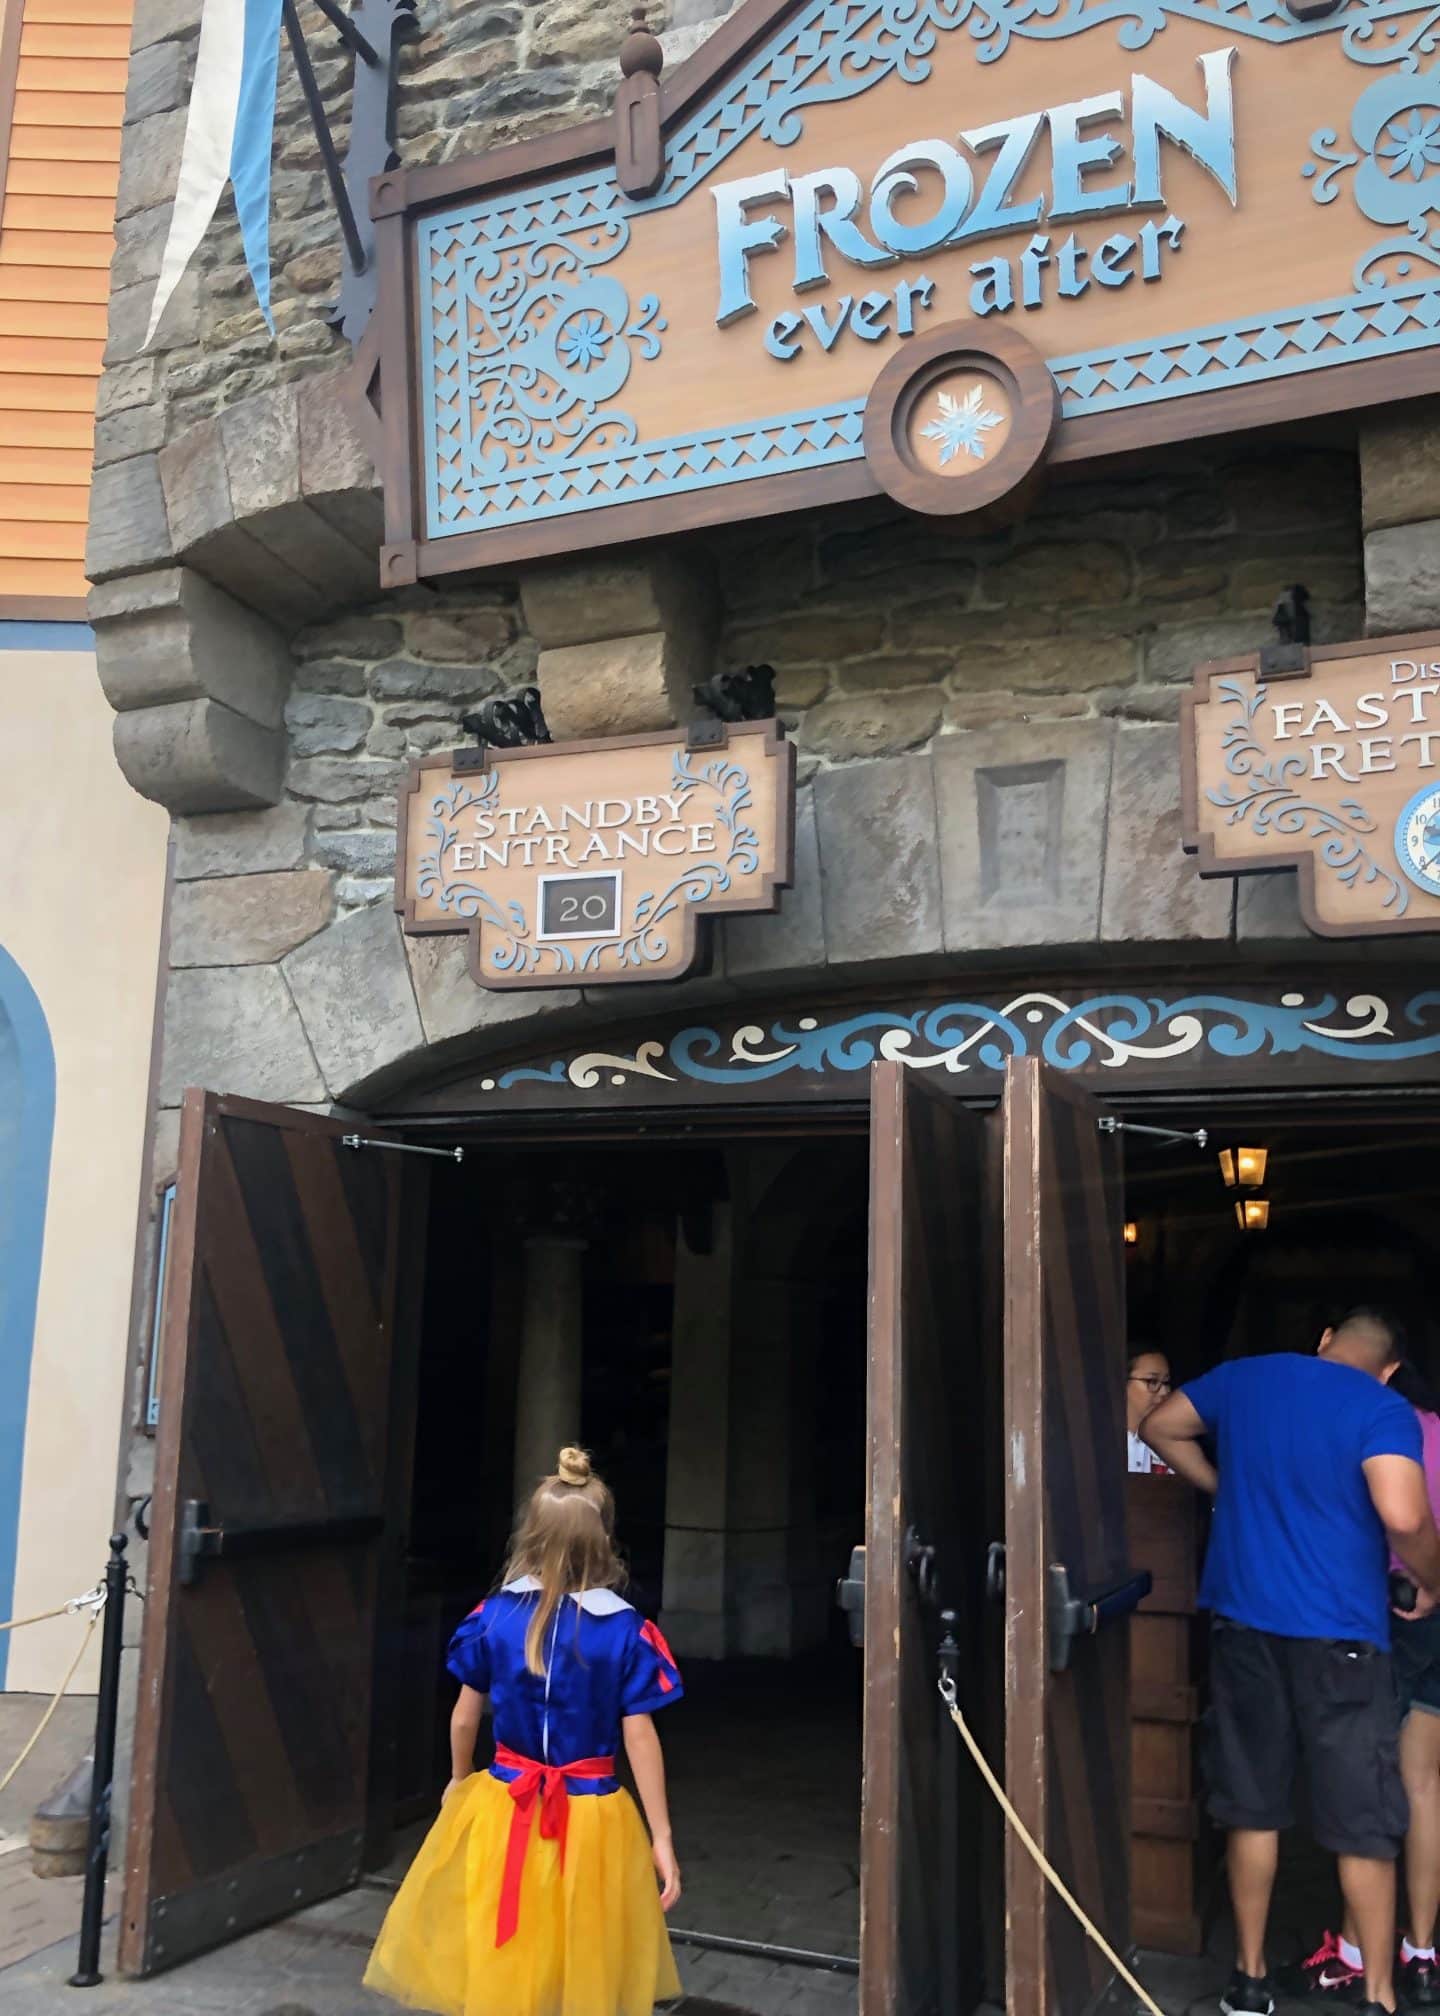 frozen ever after at Epcot